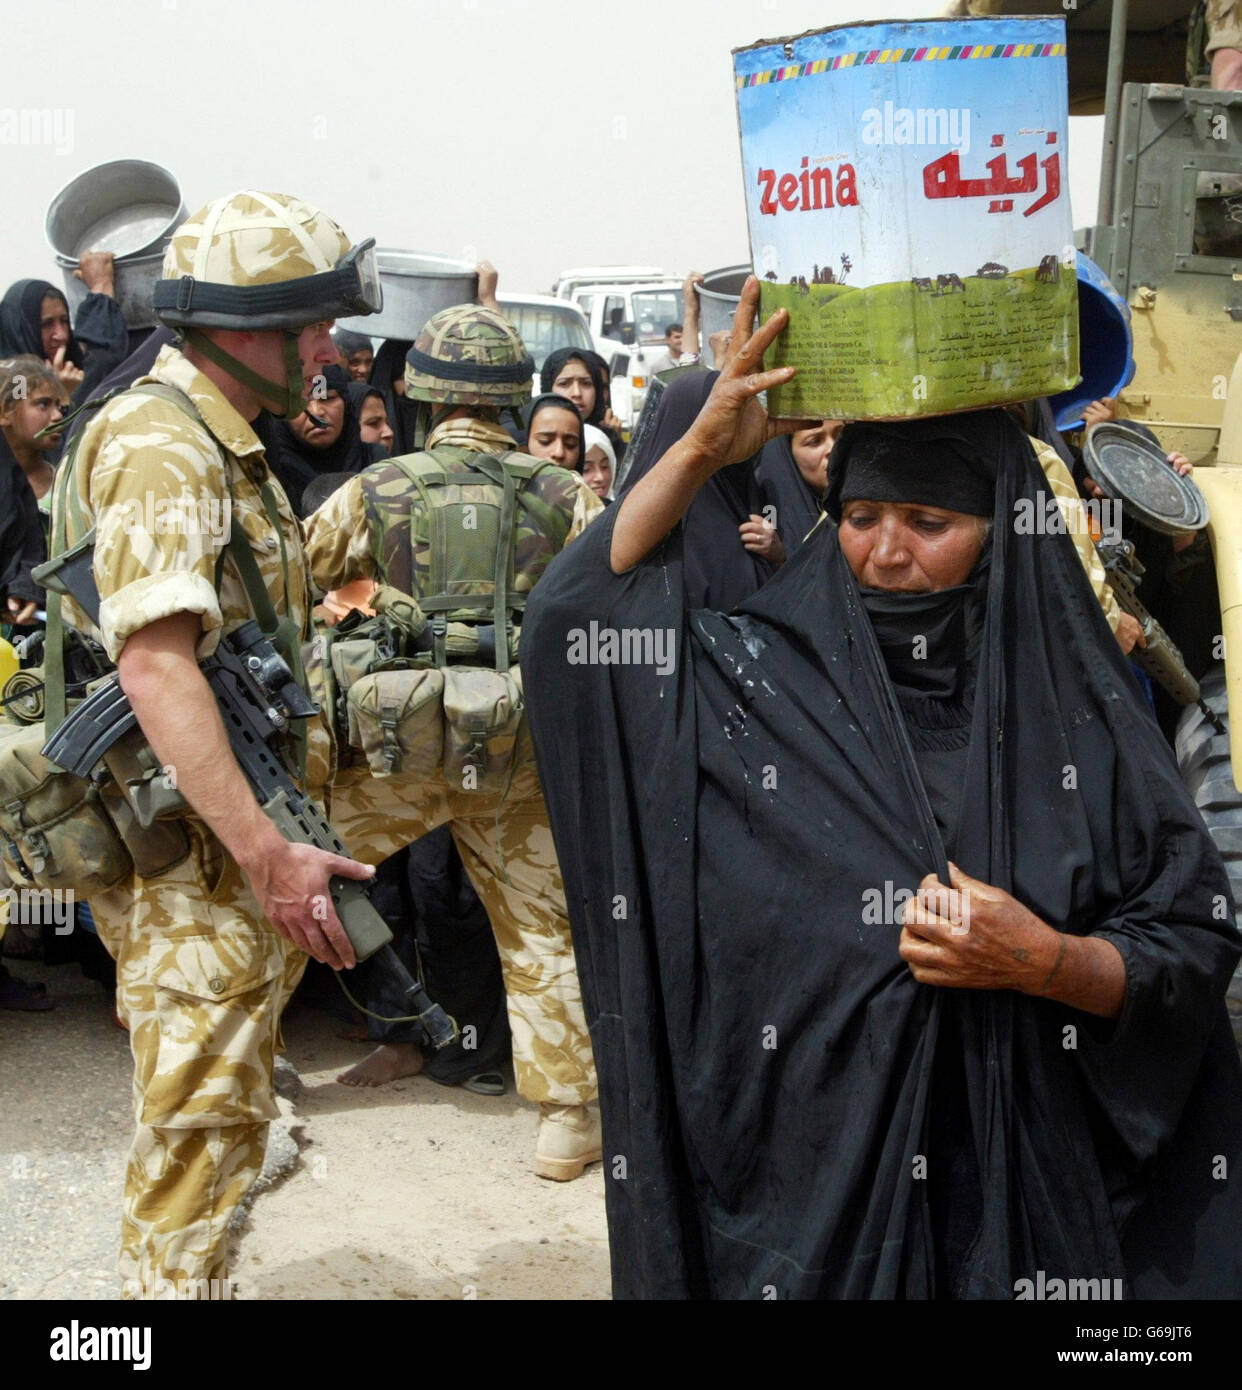 A women carries off water as others wait in a queue with an empty containers which they hope to fill from a tanker, while soldiers from the British 23 Pioneer Regiment watch over the line in the southern Iraqi town of Safwan. * The British forces are helping the local people with humanitarian aid. Stock Photo